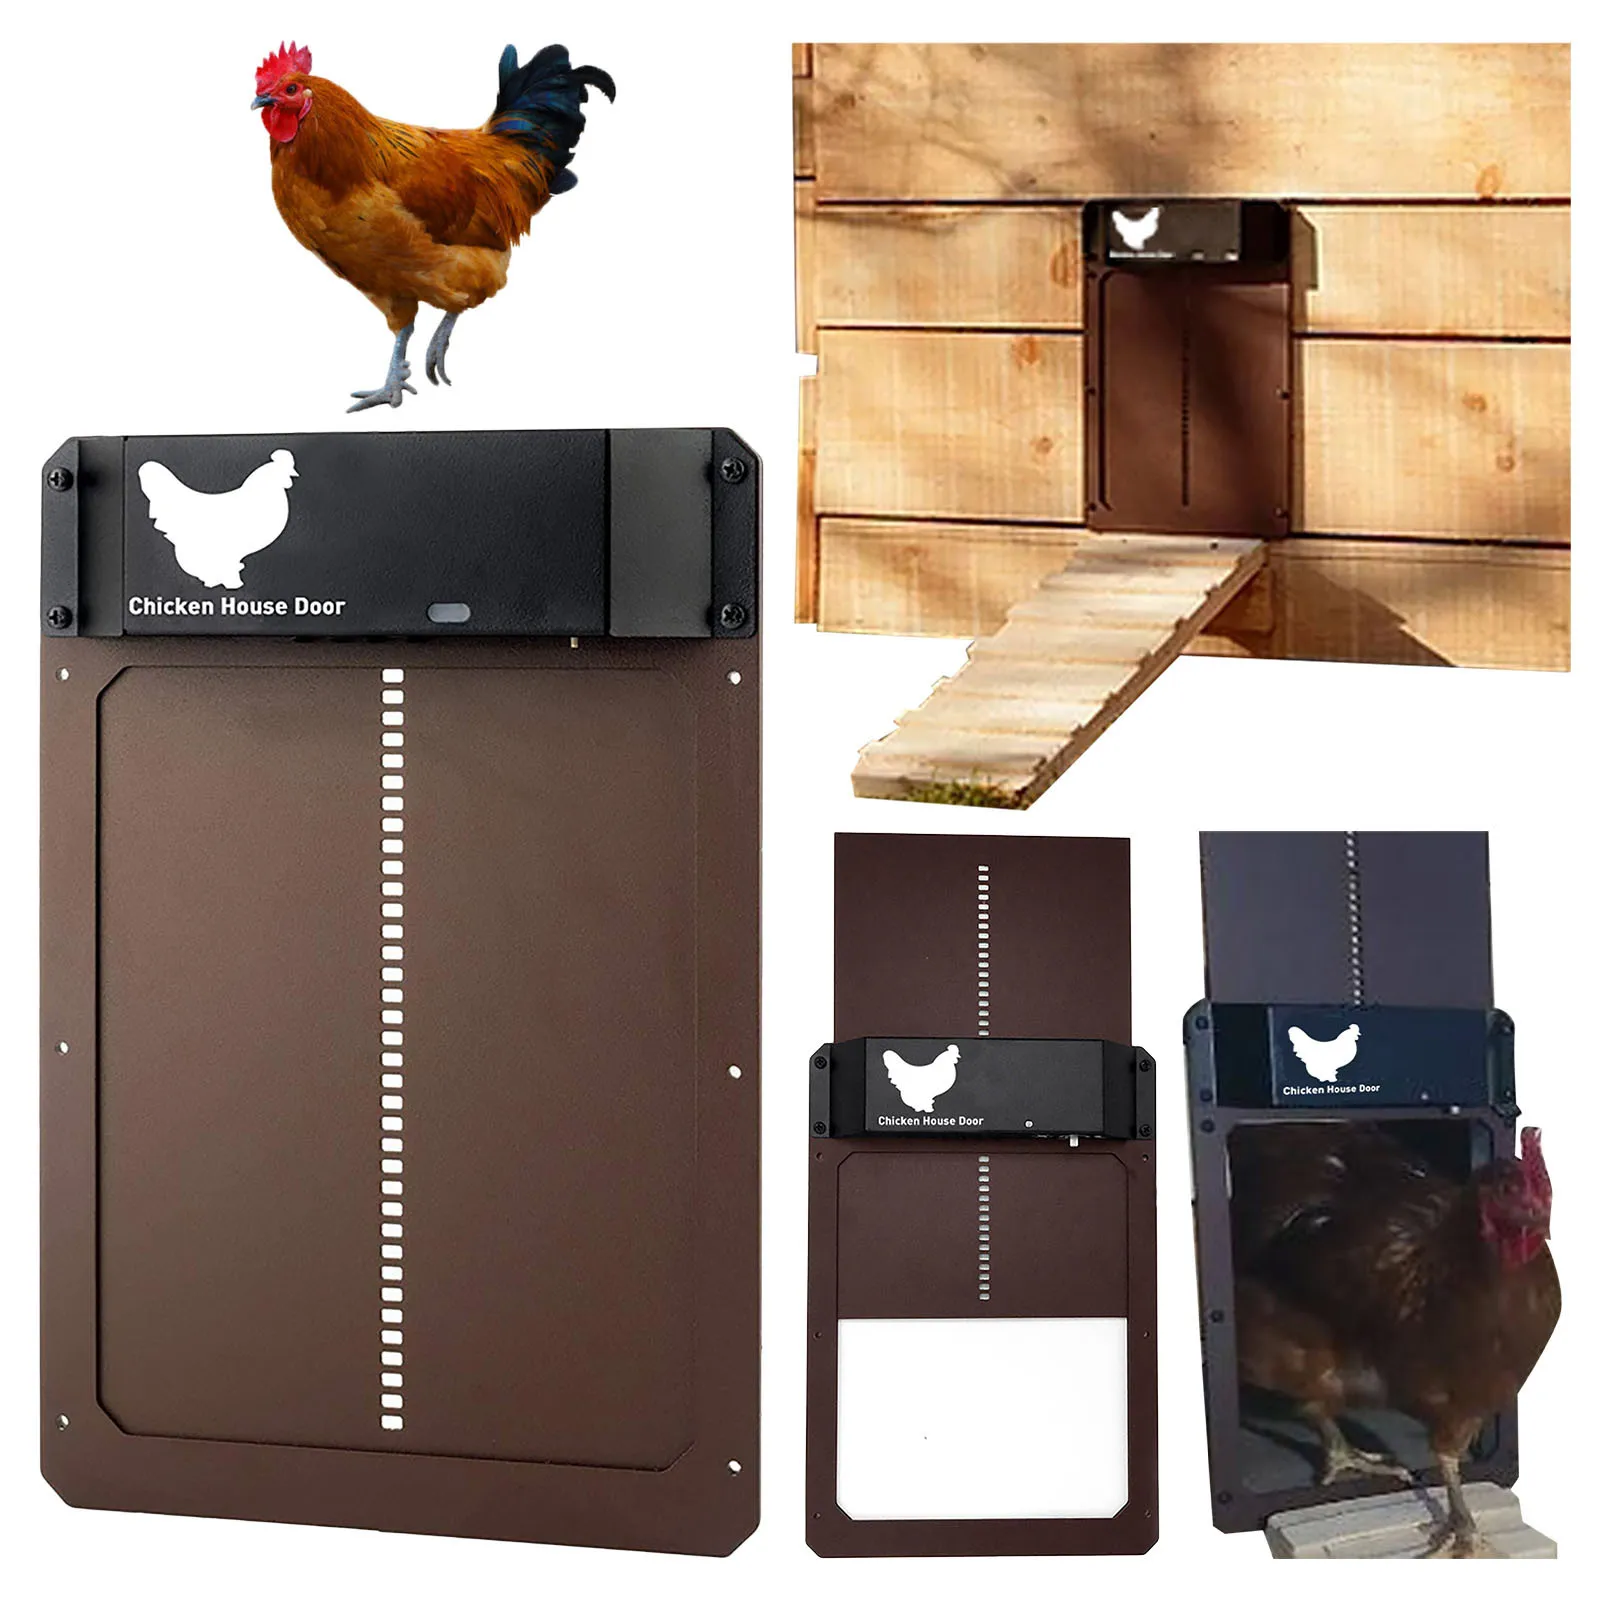 

Chicken Door Automatic Chicken Coop Door With Light Sensing Smart Home Farms For Feeding Poultry Chickens Supplies